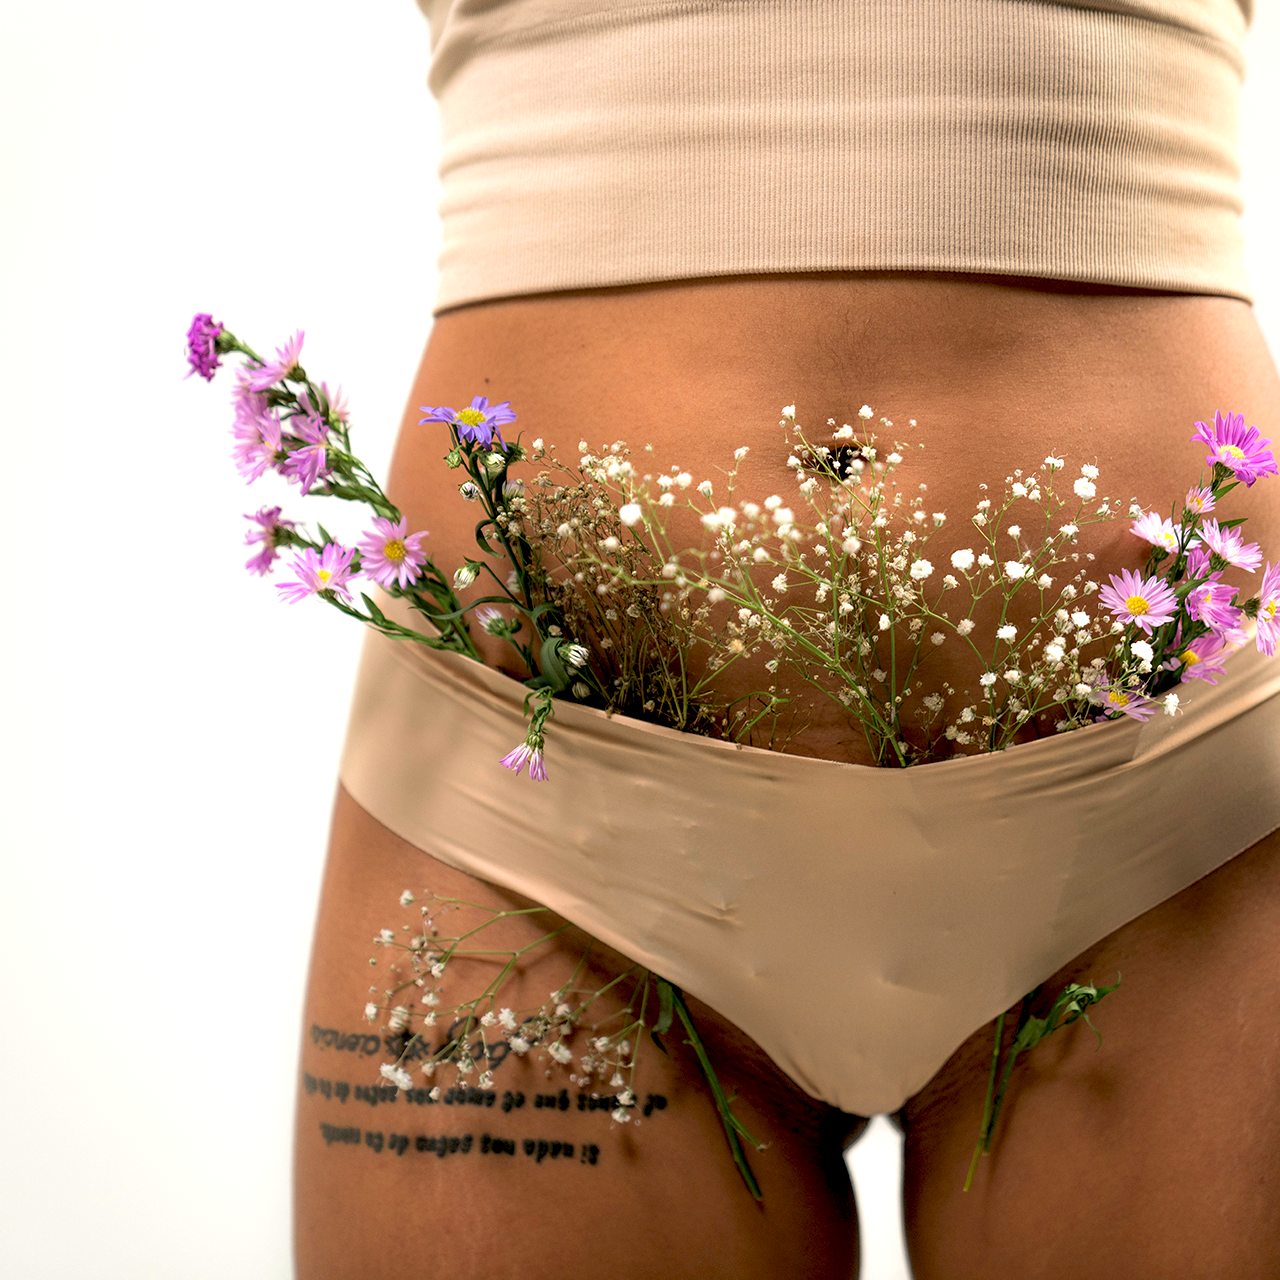 a woman's butt with flowers in it